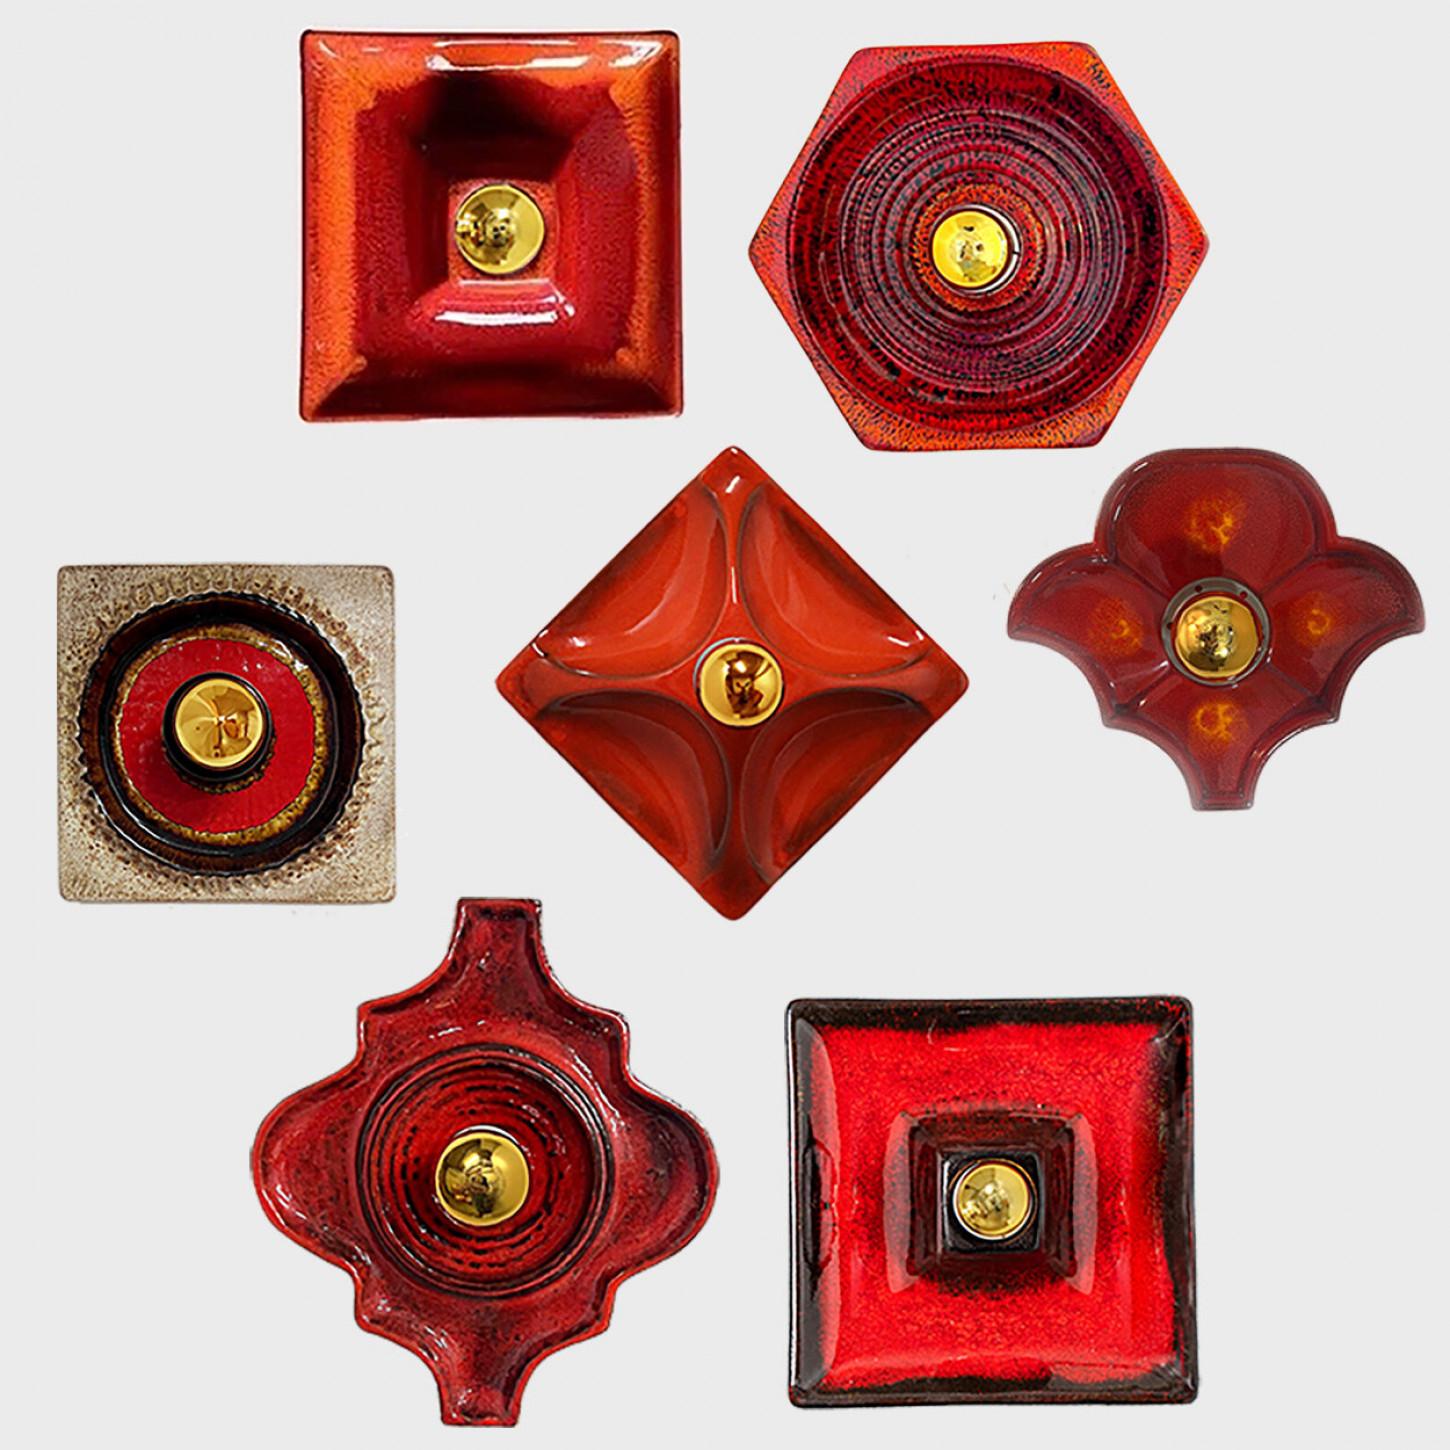 We have a whole range of mid-century West-Germany wall lights all in red tones
They are from around 1970 and typical for West-Germany ceramics during that time.

They are a bit different is size, but approximately around 10.65